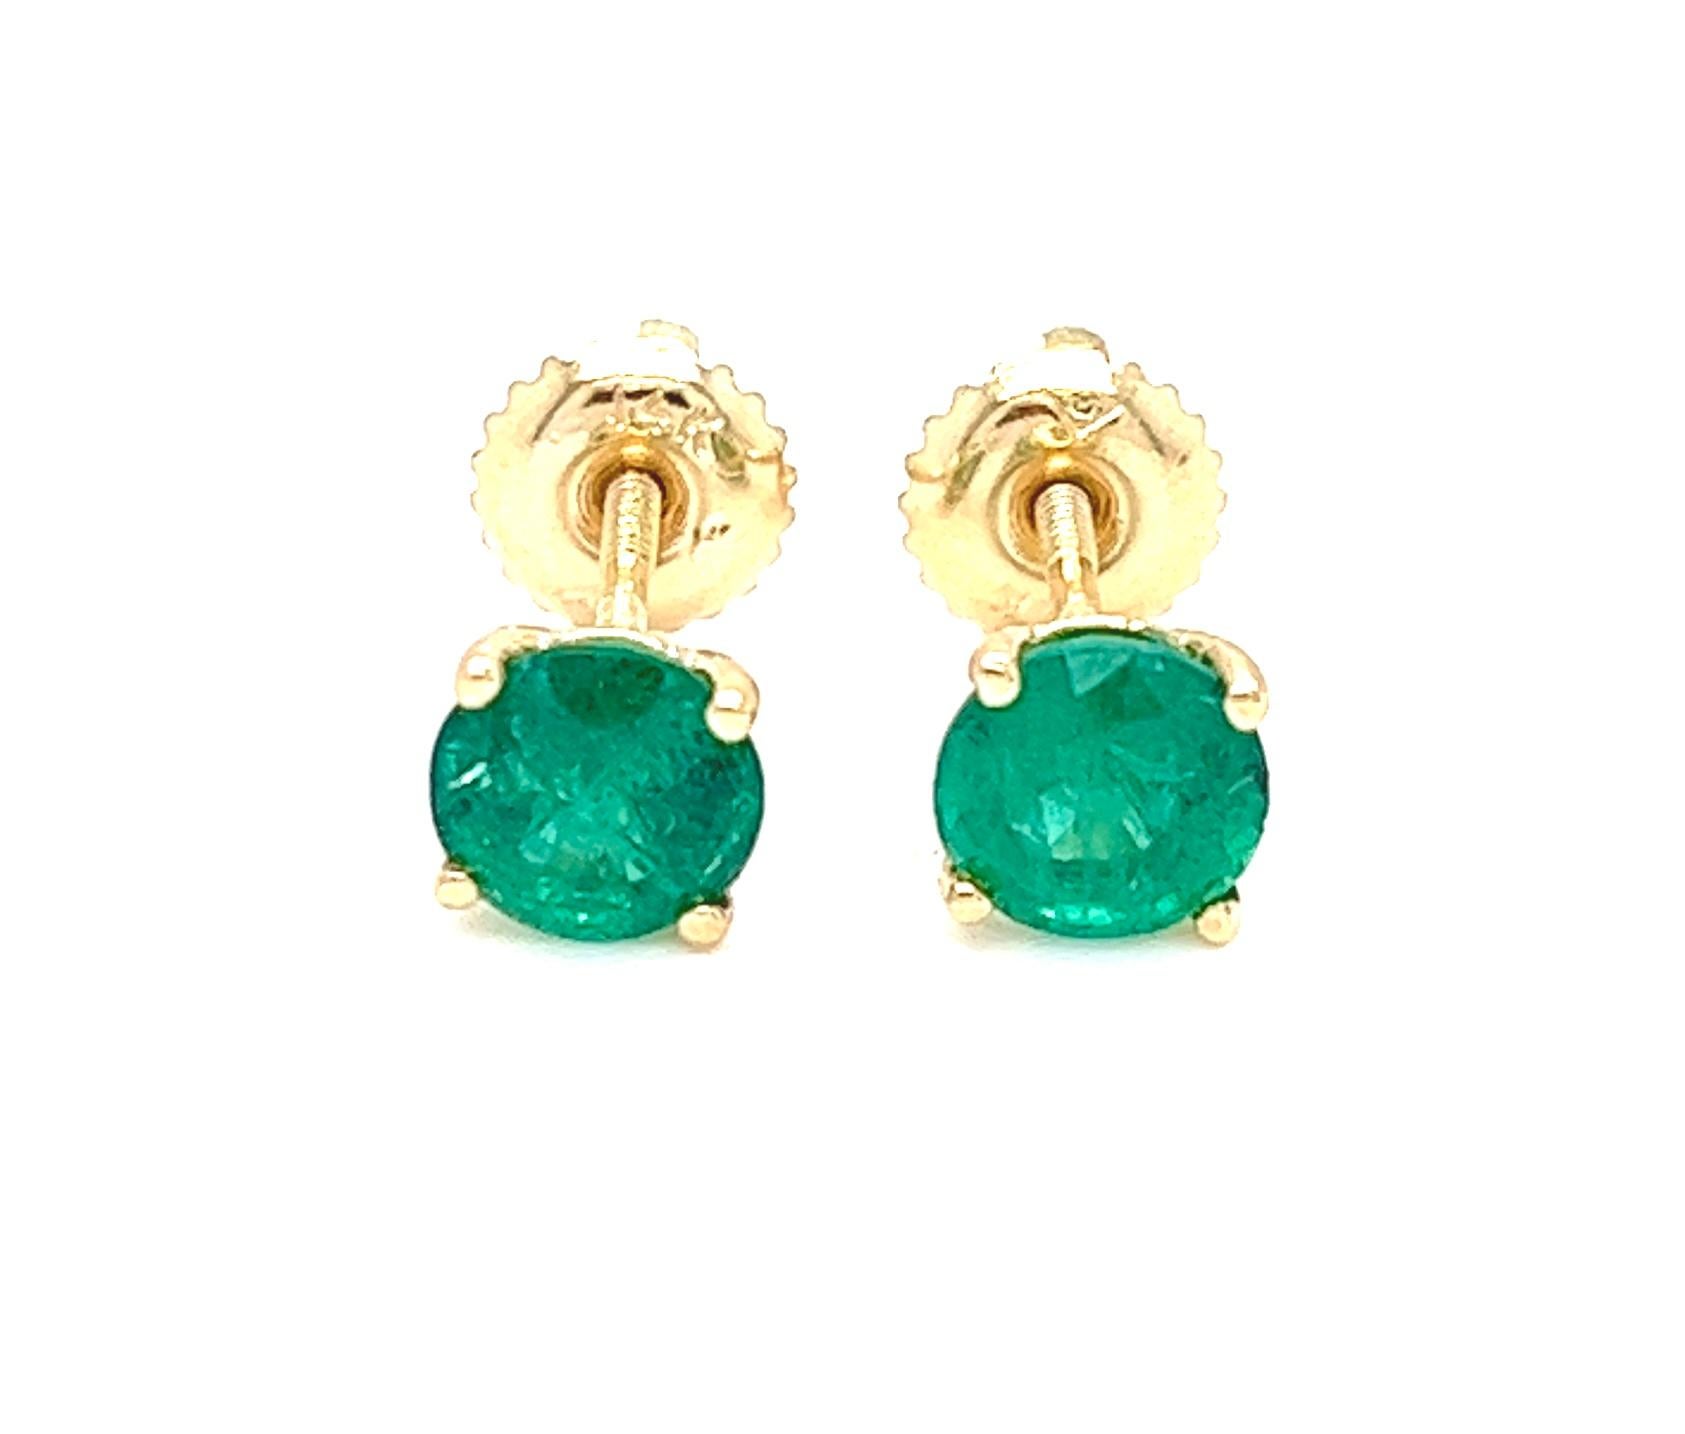 Elegant 14K Yellow Gold Emerald Stud Earrings

Description:
Indulge in the timeless allure of natural earth-mined emeralds with these stunning 14K yellow gold stud earrings. Each earring features a round brilliant-cut emerald measuring about 5.75mm